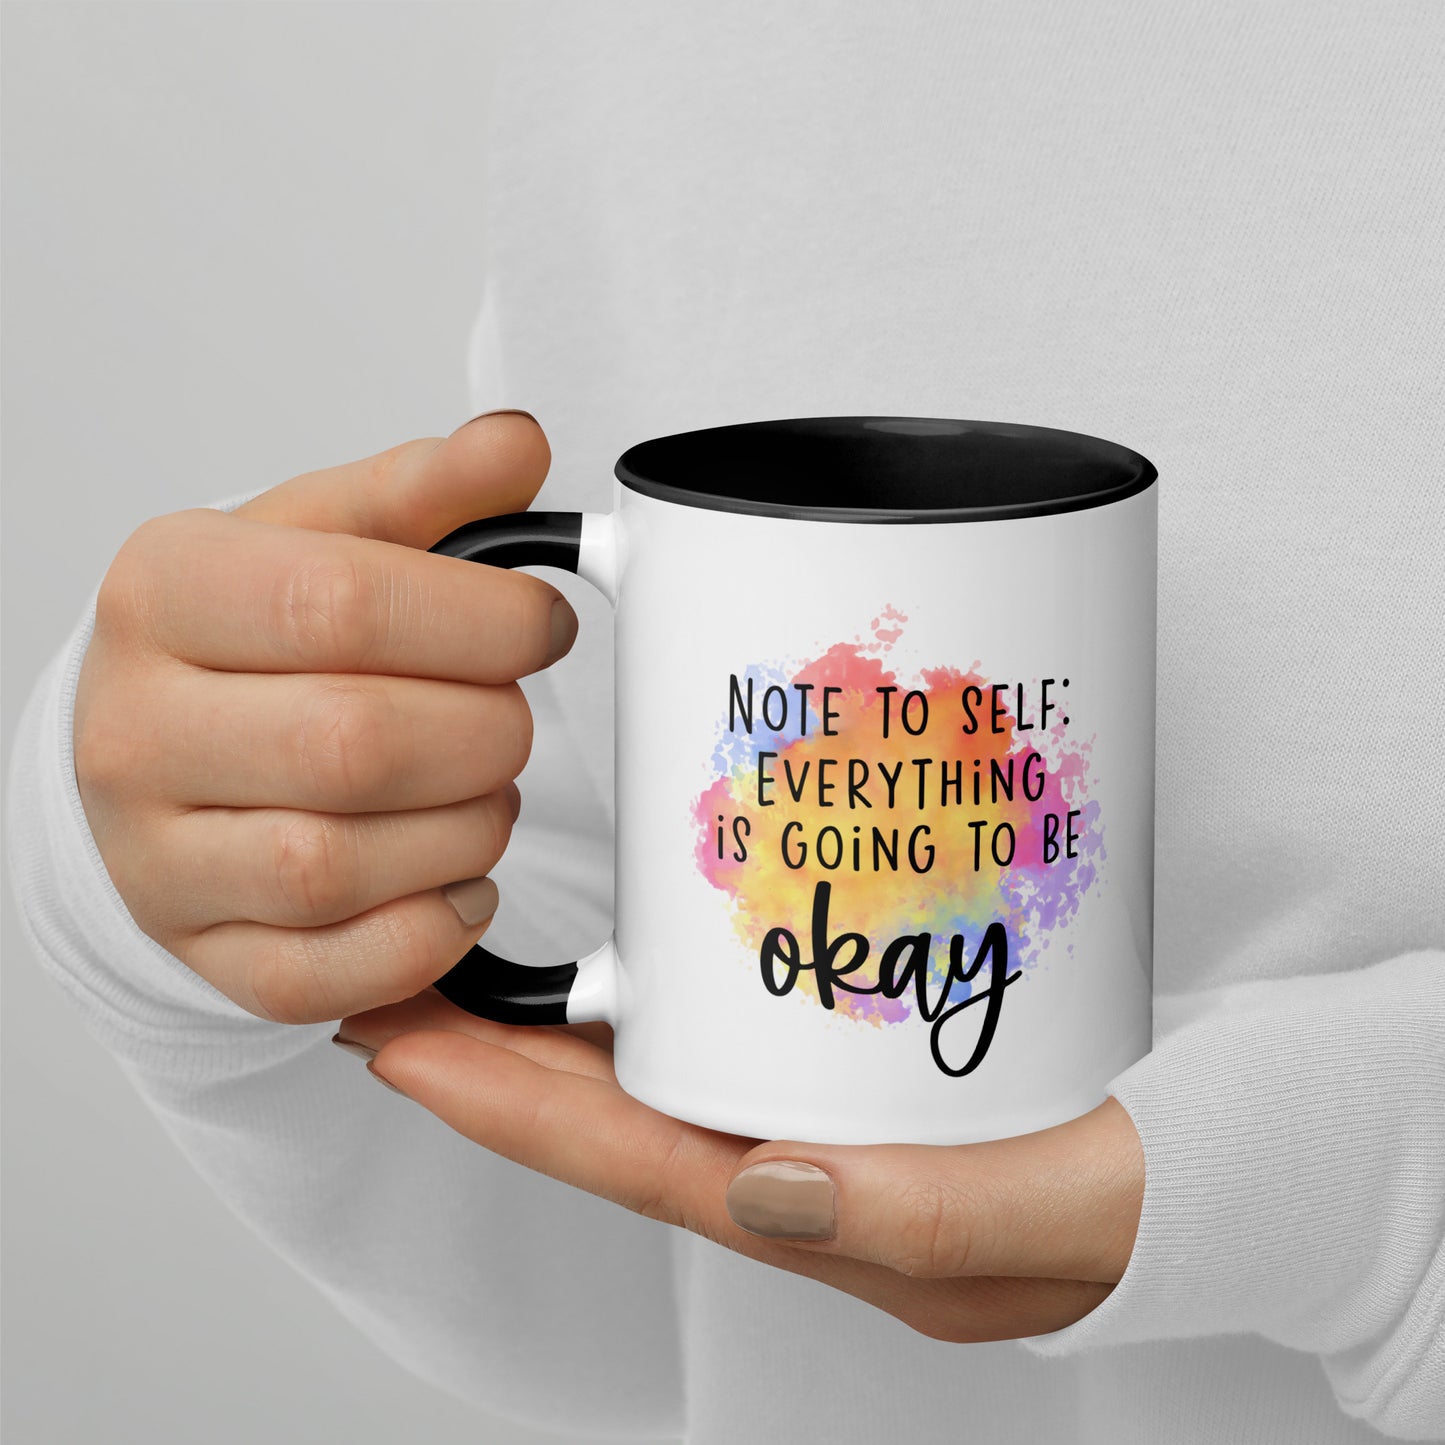 Note to Self Mug in two sizes